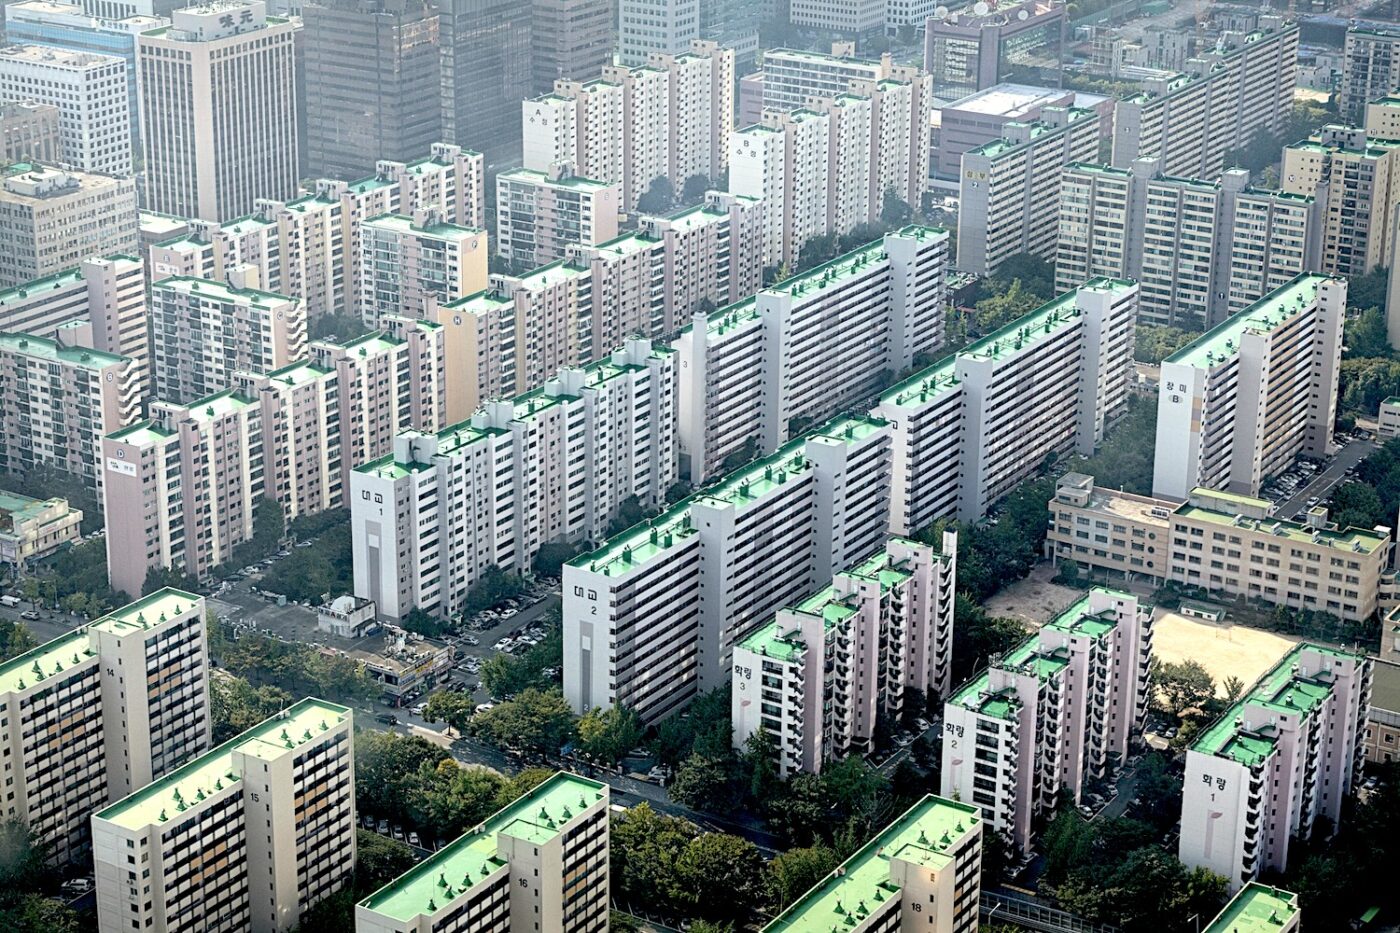 1 Million People Bid For 3 Tiny Apartments In Asia’s Most Sought-After City